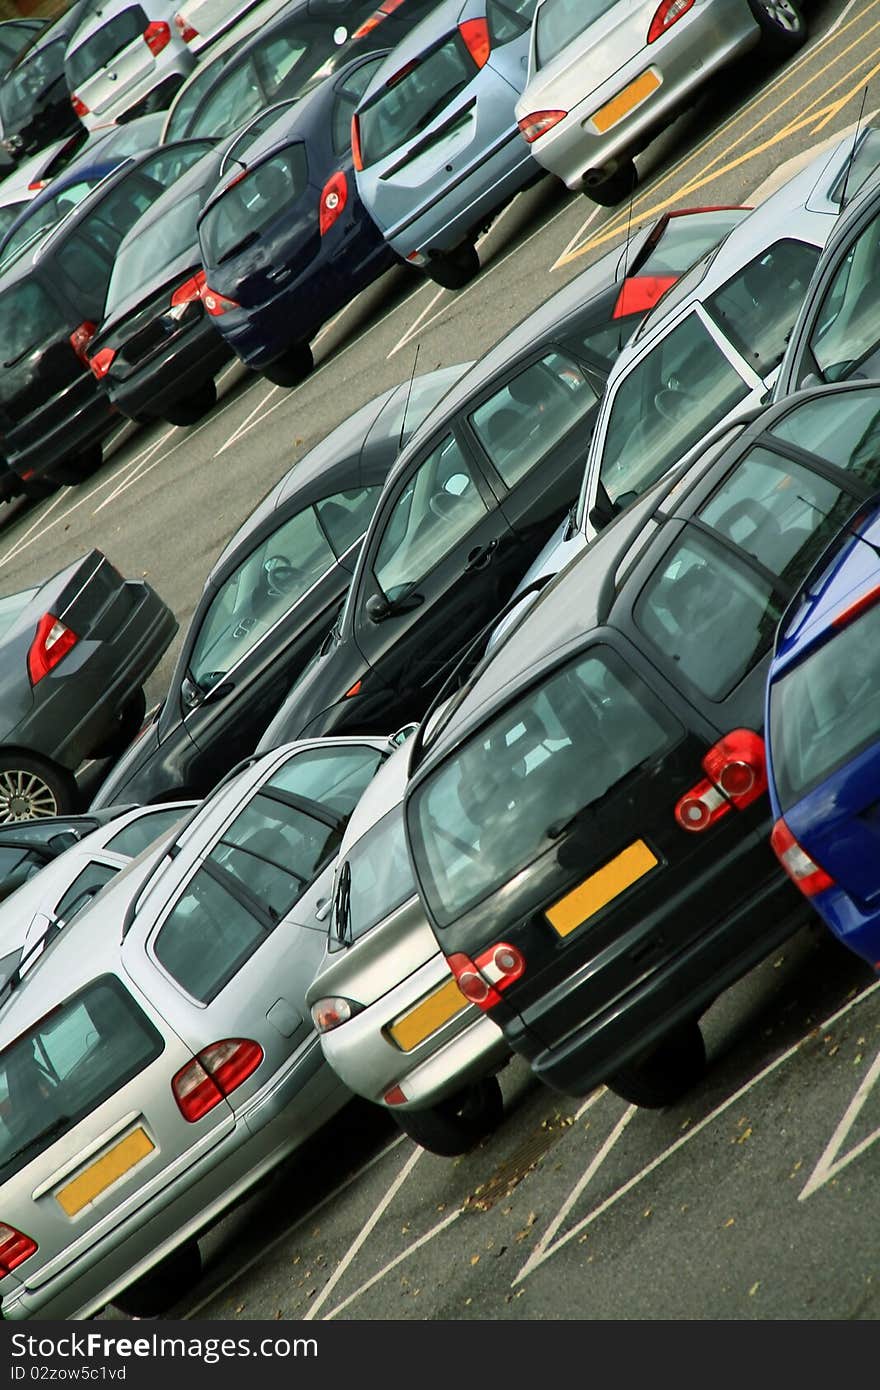 Image of cars in a carpark in London. Image of cars in a carpark in London